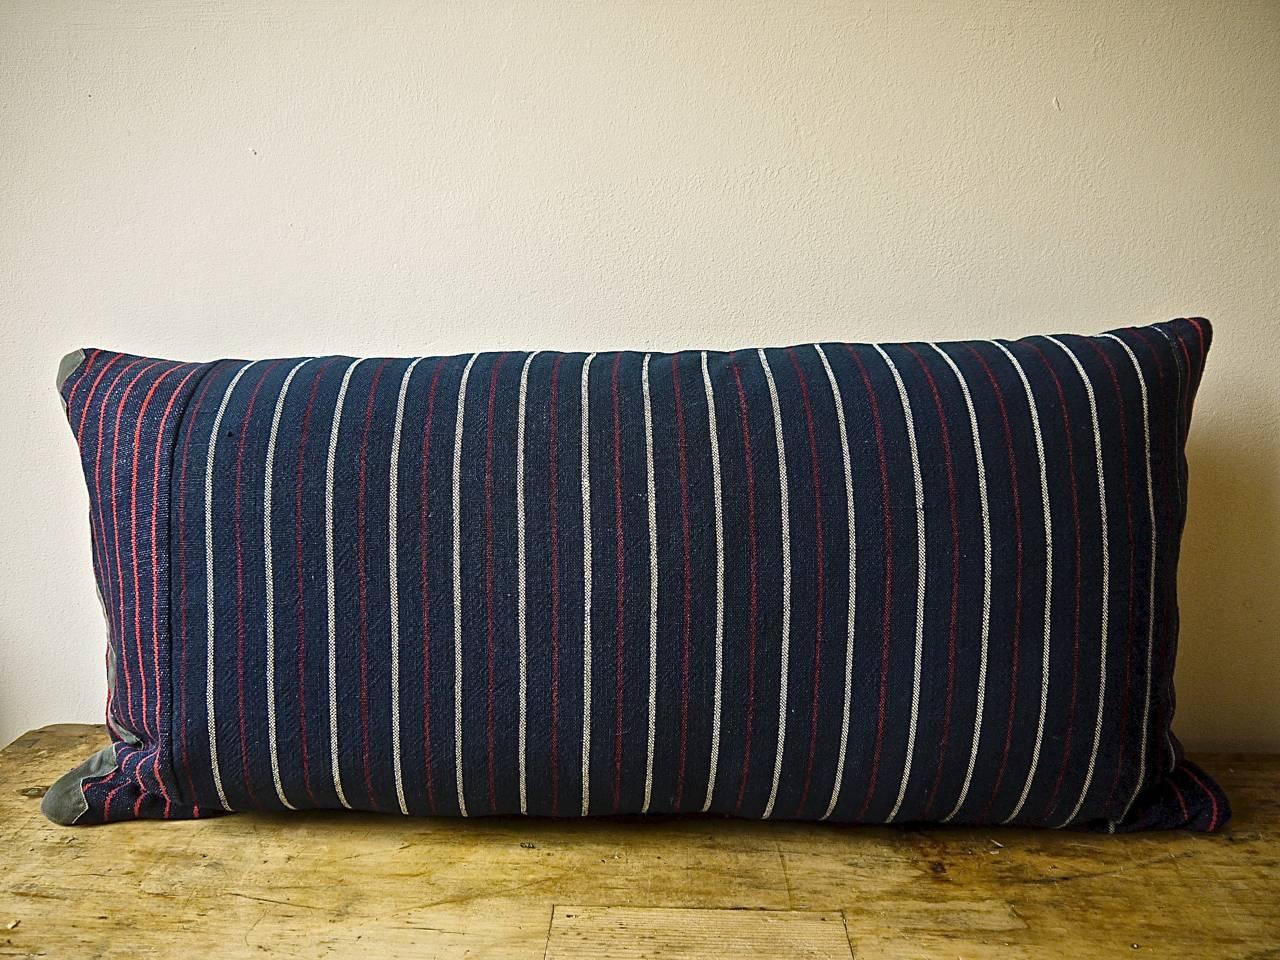 French 19th century woven cotton and wool striped cushion of dark indigo with white, red colors. Original piece made up of two different stripes with an 'as found ' border of a French 19th century grey cotton trim at the base and to the side of the